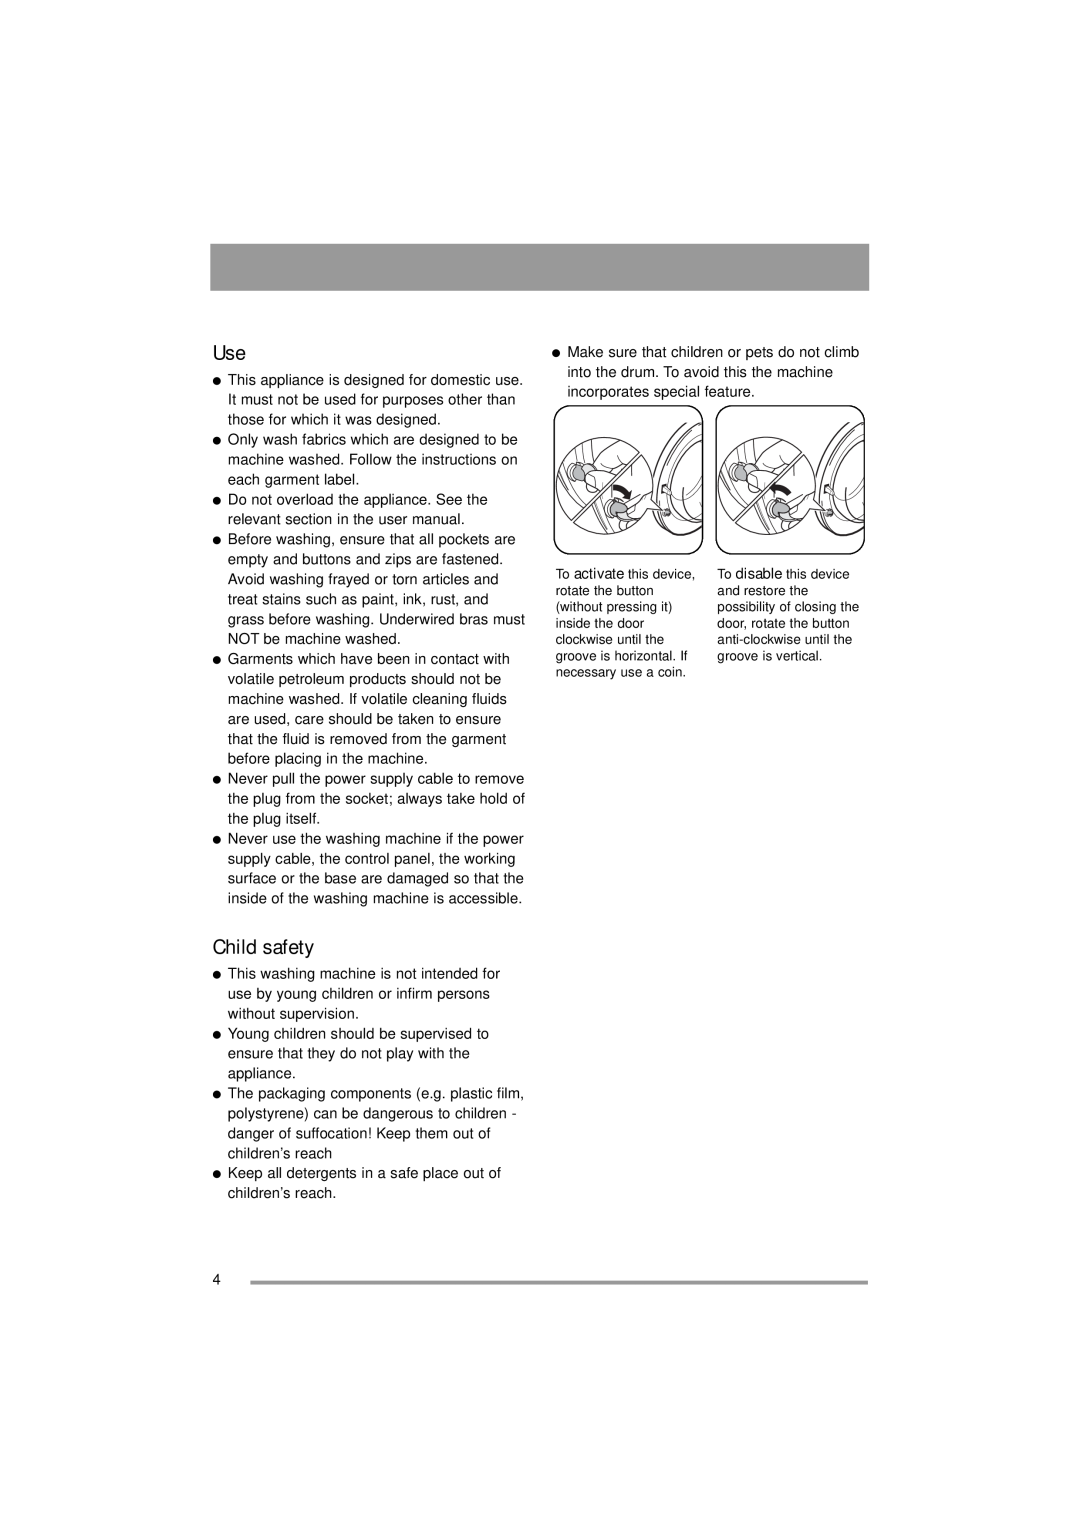 Zanussi ZWF 16581 user manual Child safety, those for which it was designed, each garment label, NOT be machine washed 